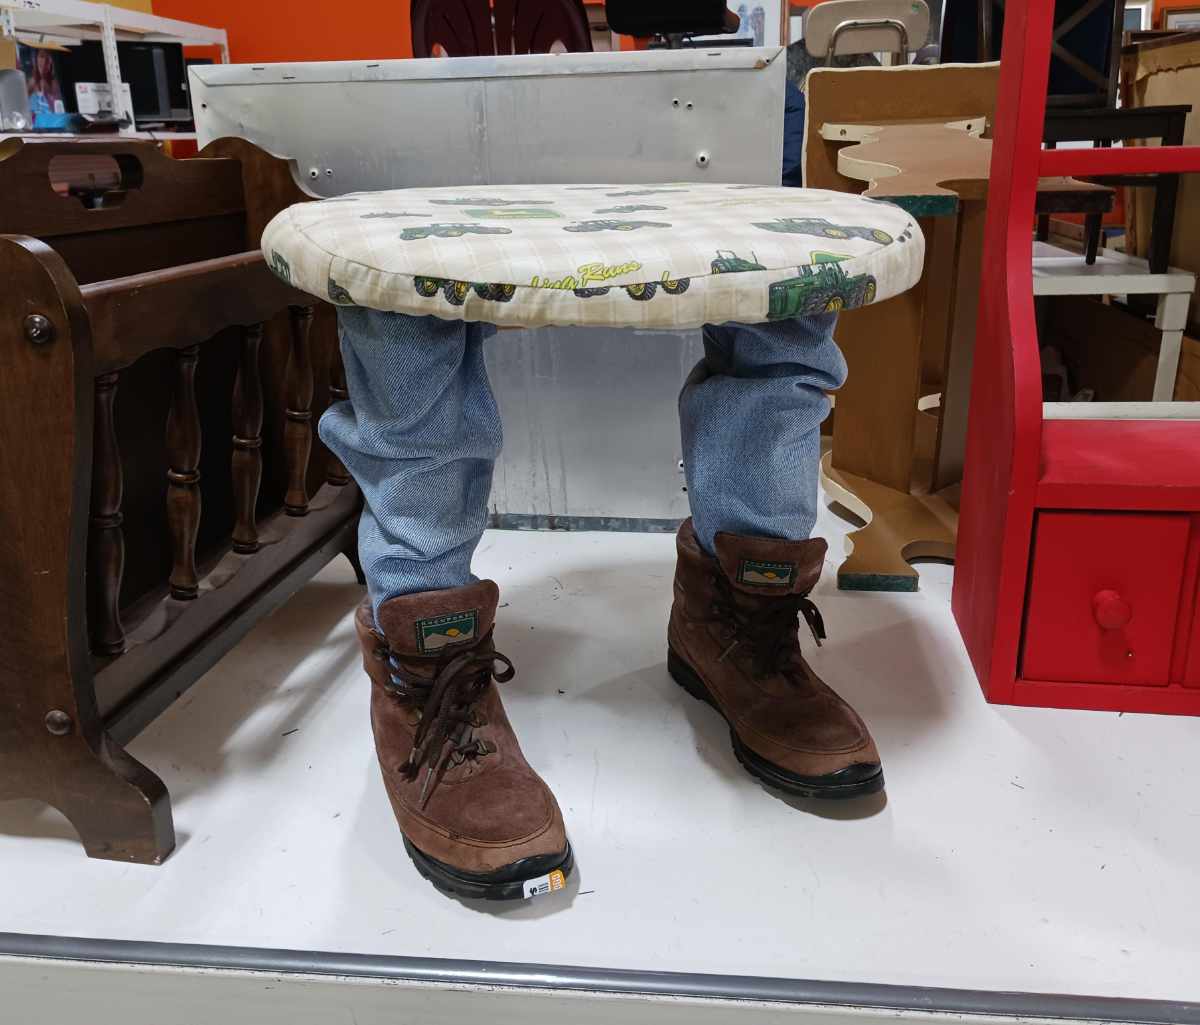 Spotted this foot stool in Goodwill